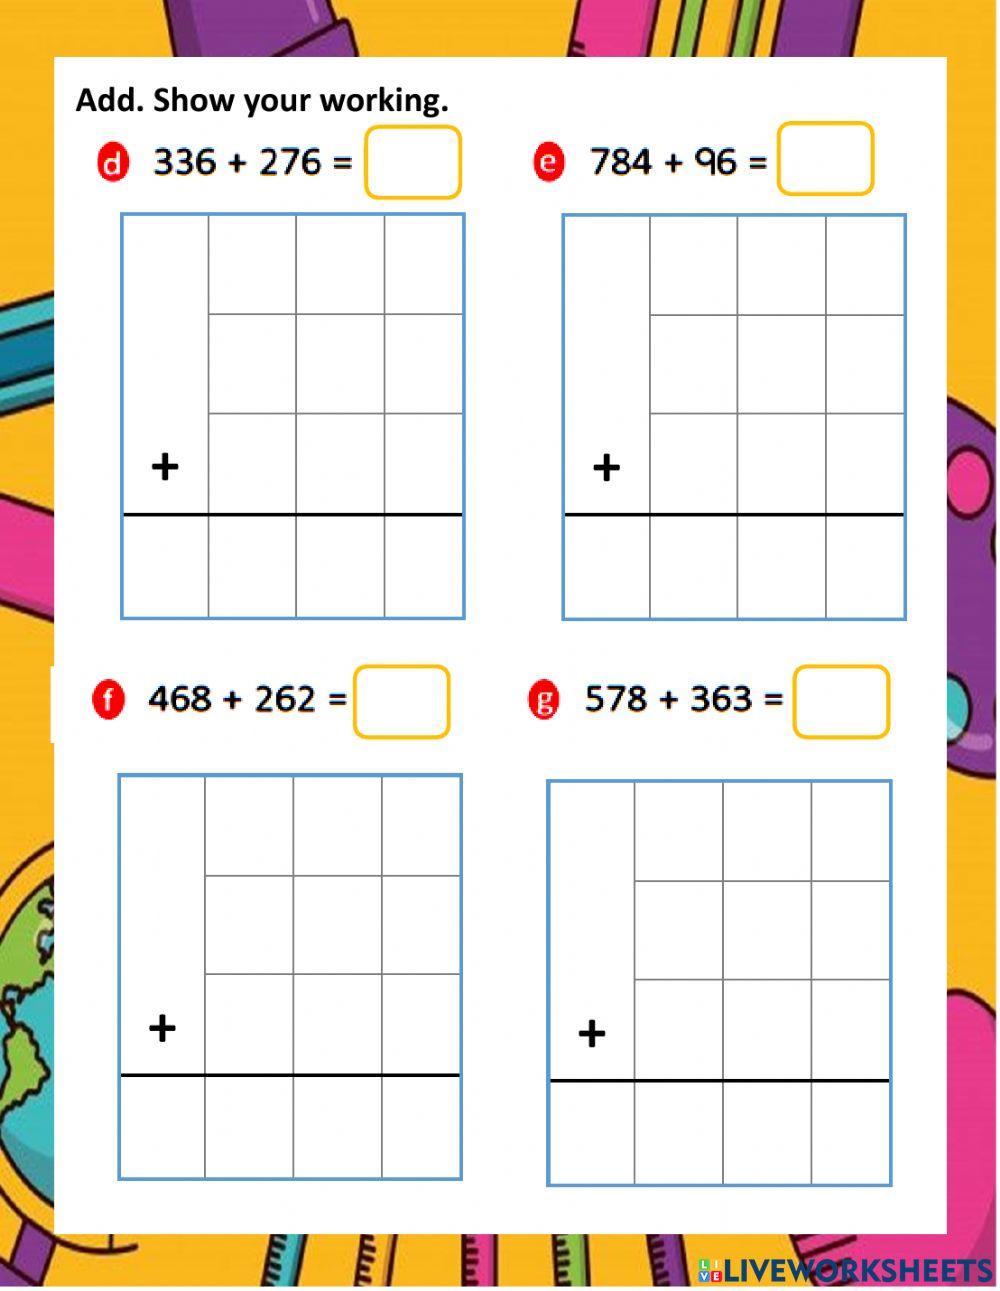 TB p34-36 Addition with regrouping tens and ones